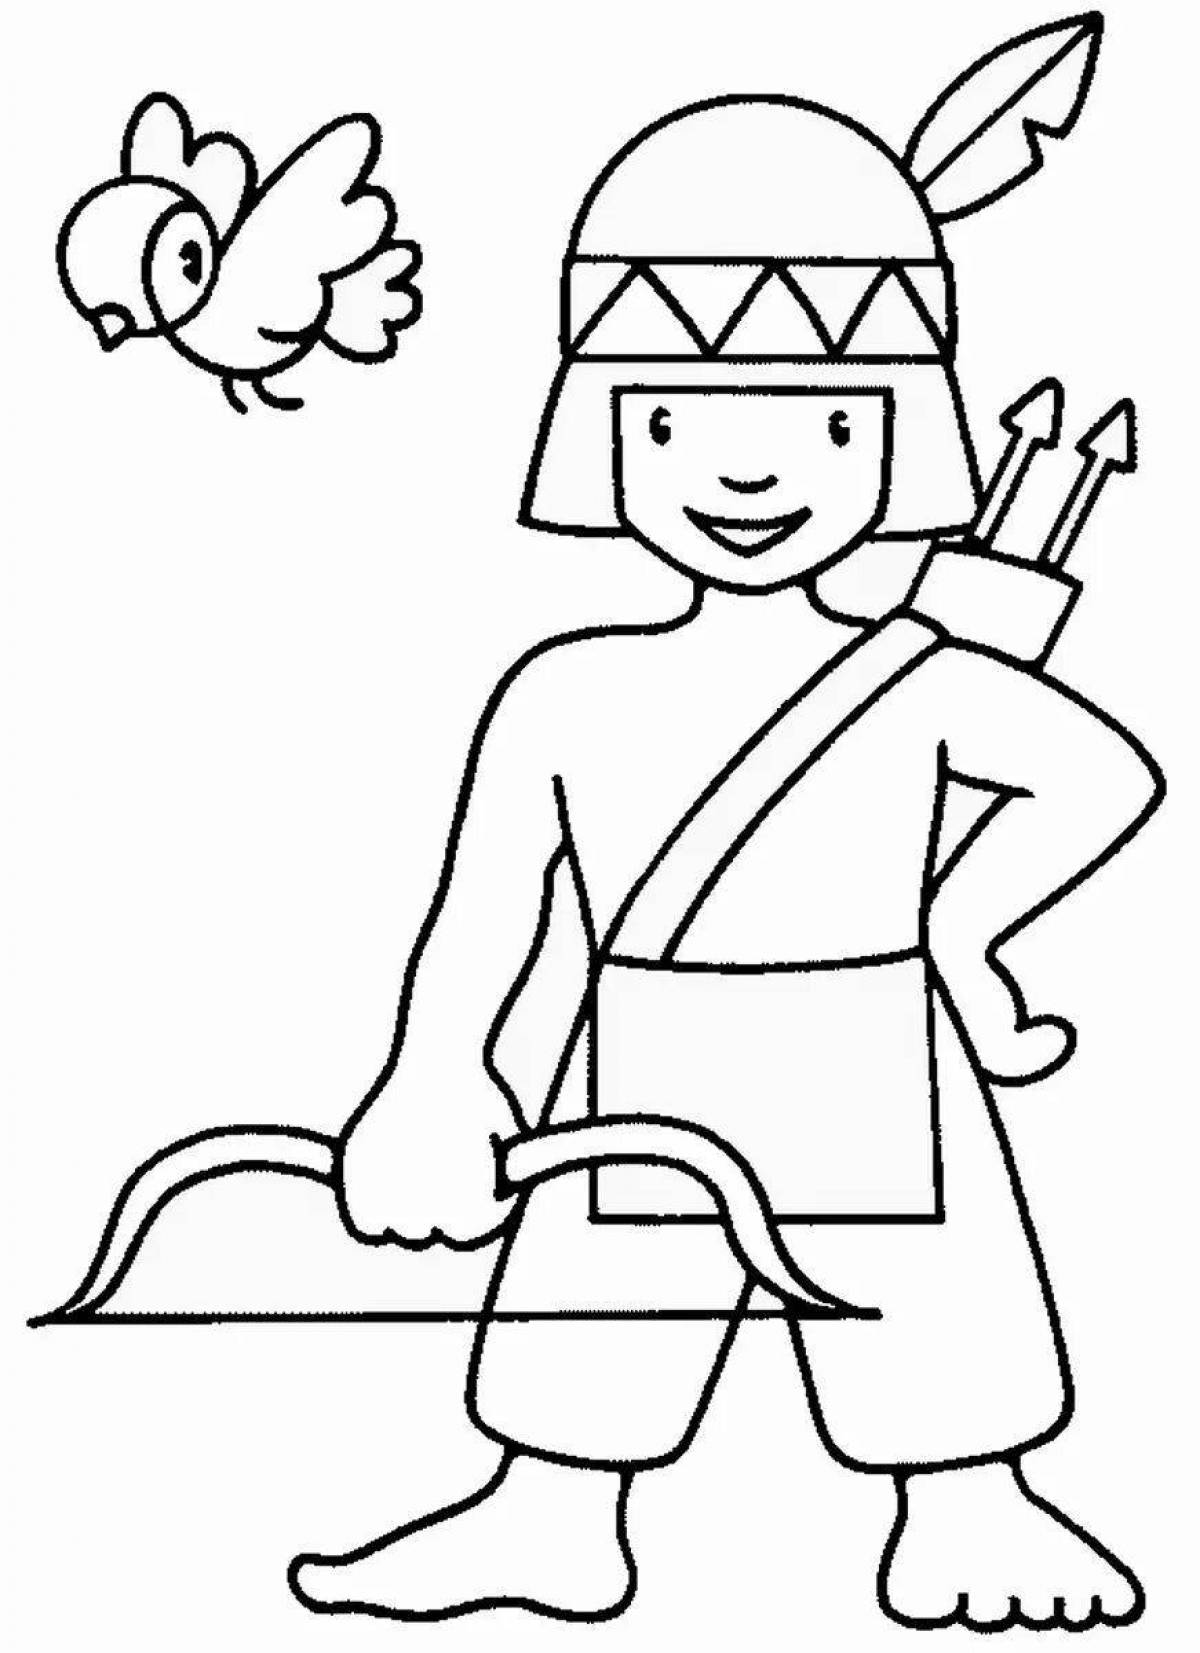 Fun Indian coloring book for kids